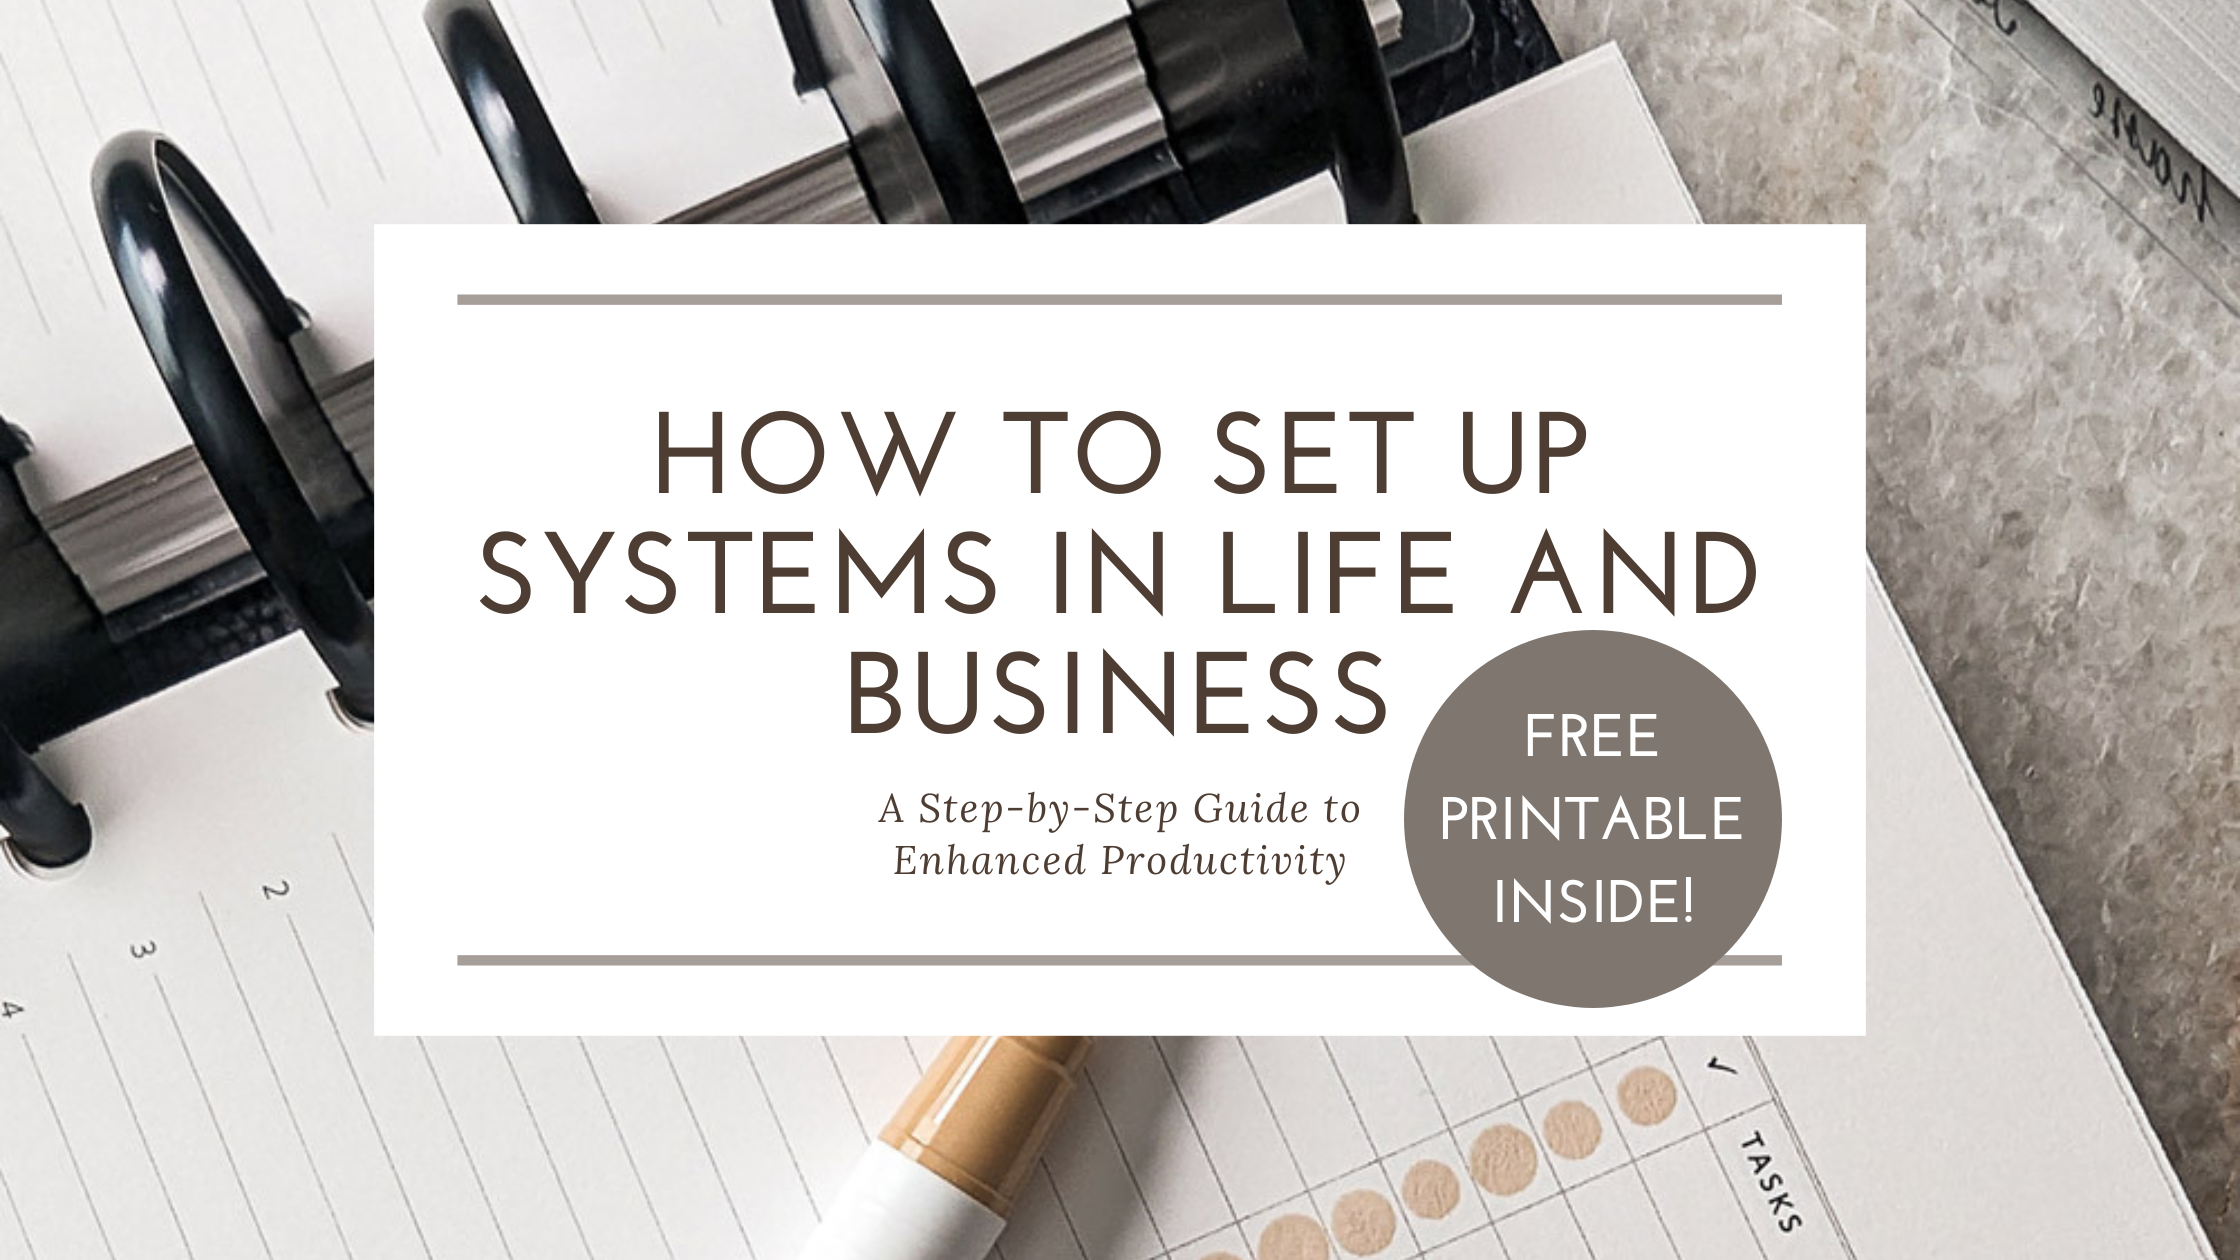 How to Set Up Systems in Life and Business: A Step-by-Step Guide to Enhanced Productivity